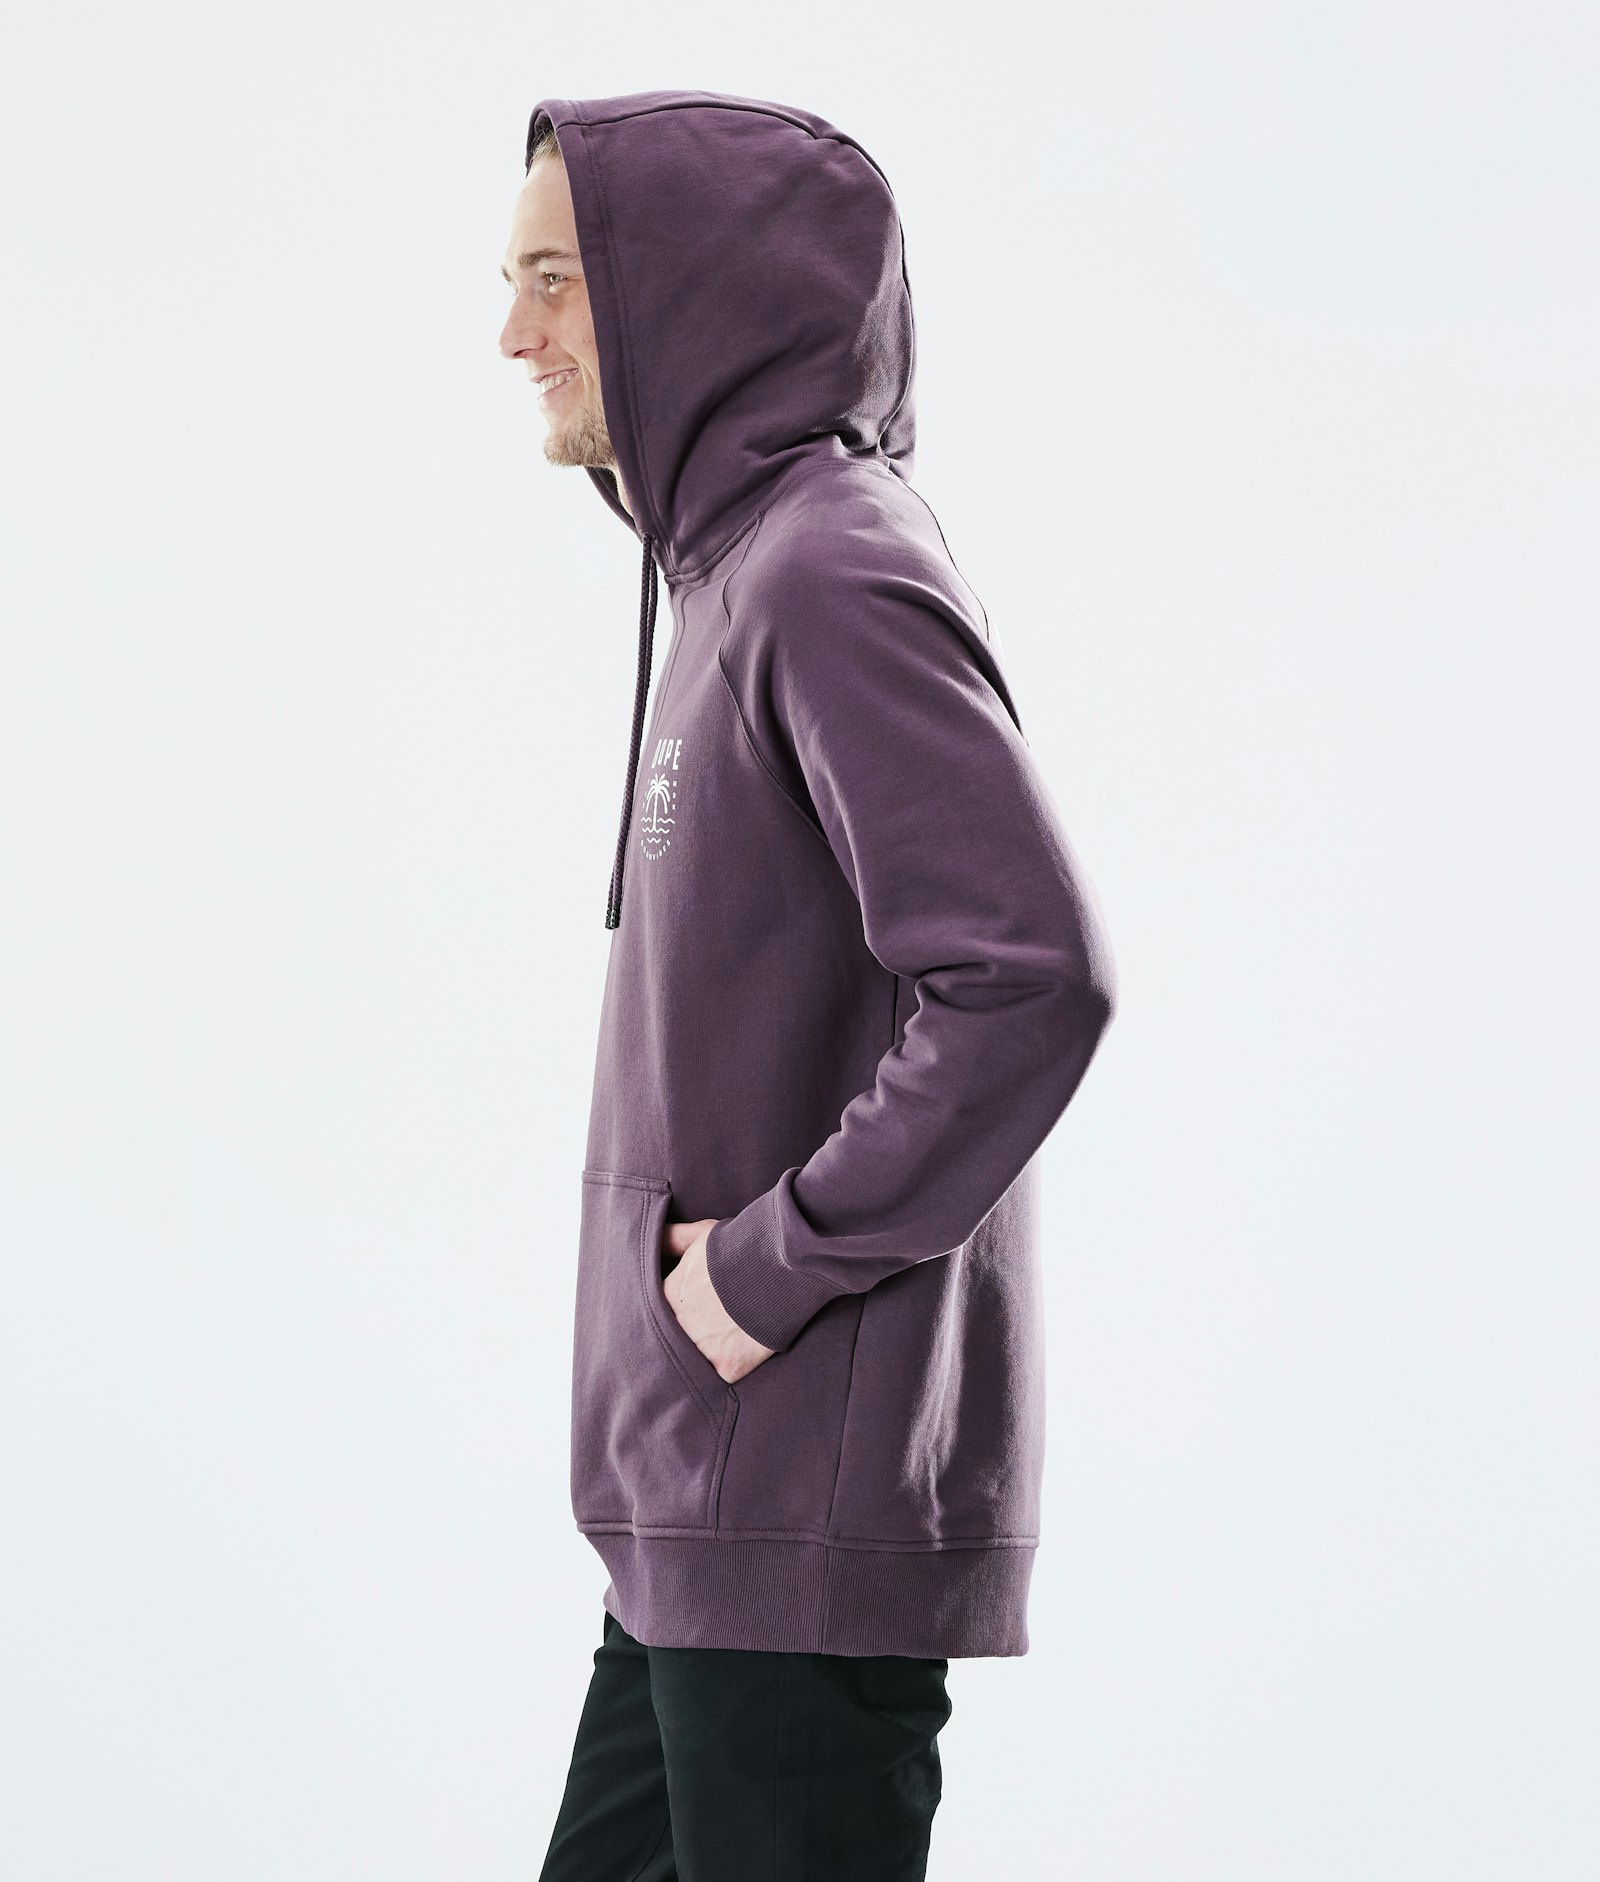 Dope Daily Sweat à capuche Homme Palm Faded Grape